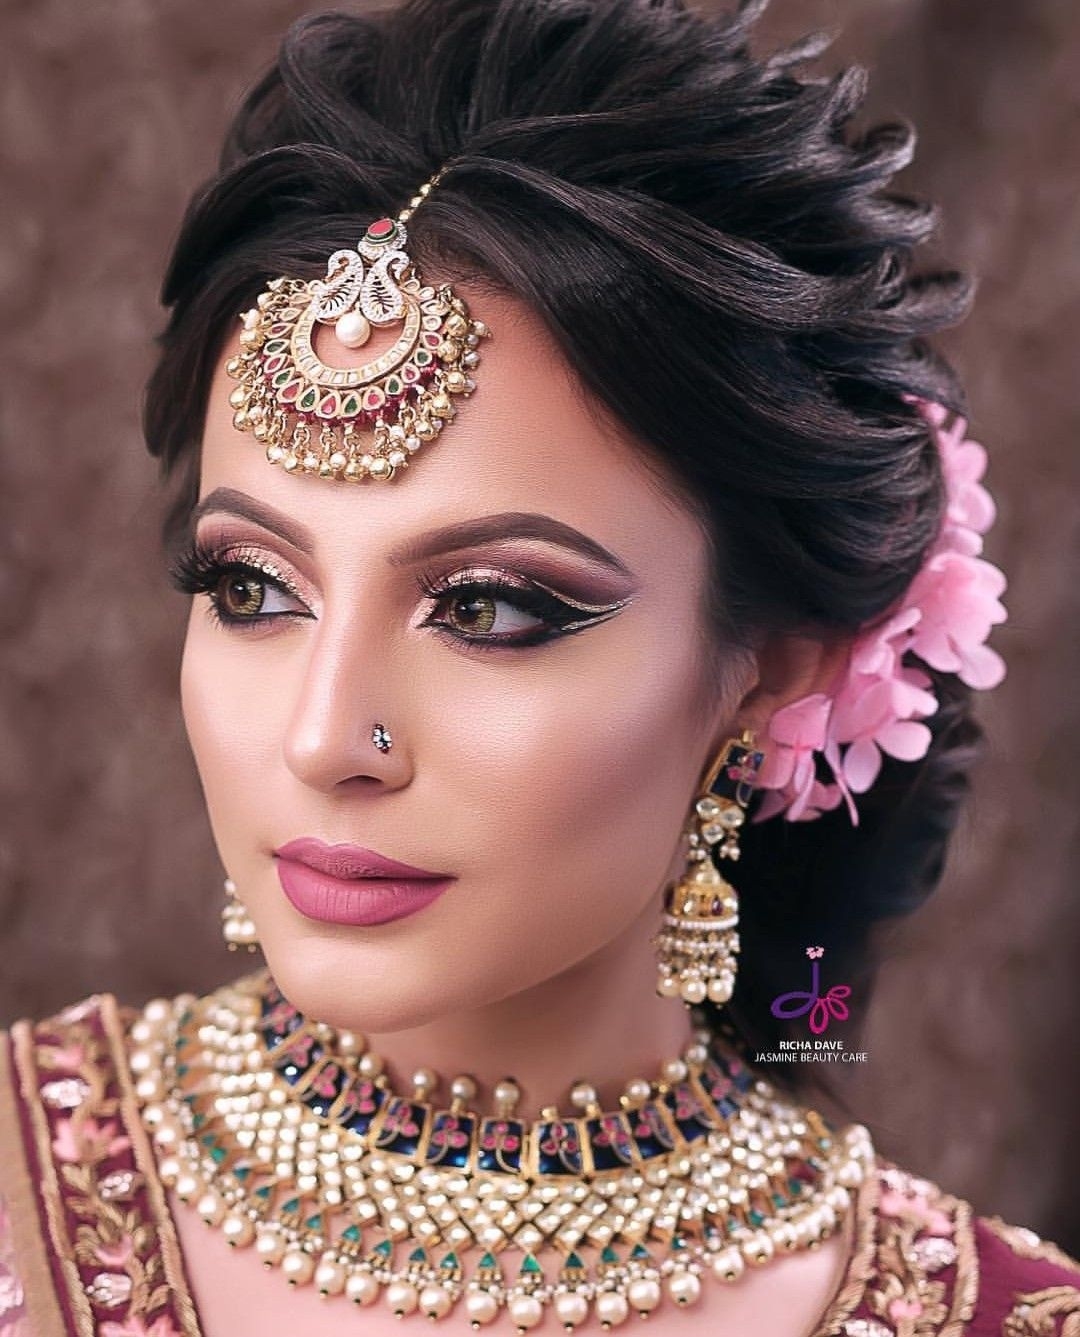 Shikachand | Indian Wedding Hairstyles within Indian Bridal Makeup And Hairstyles